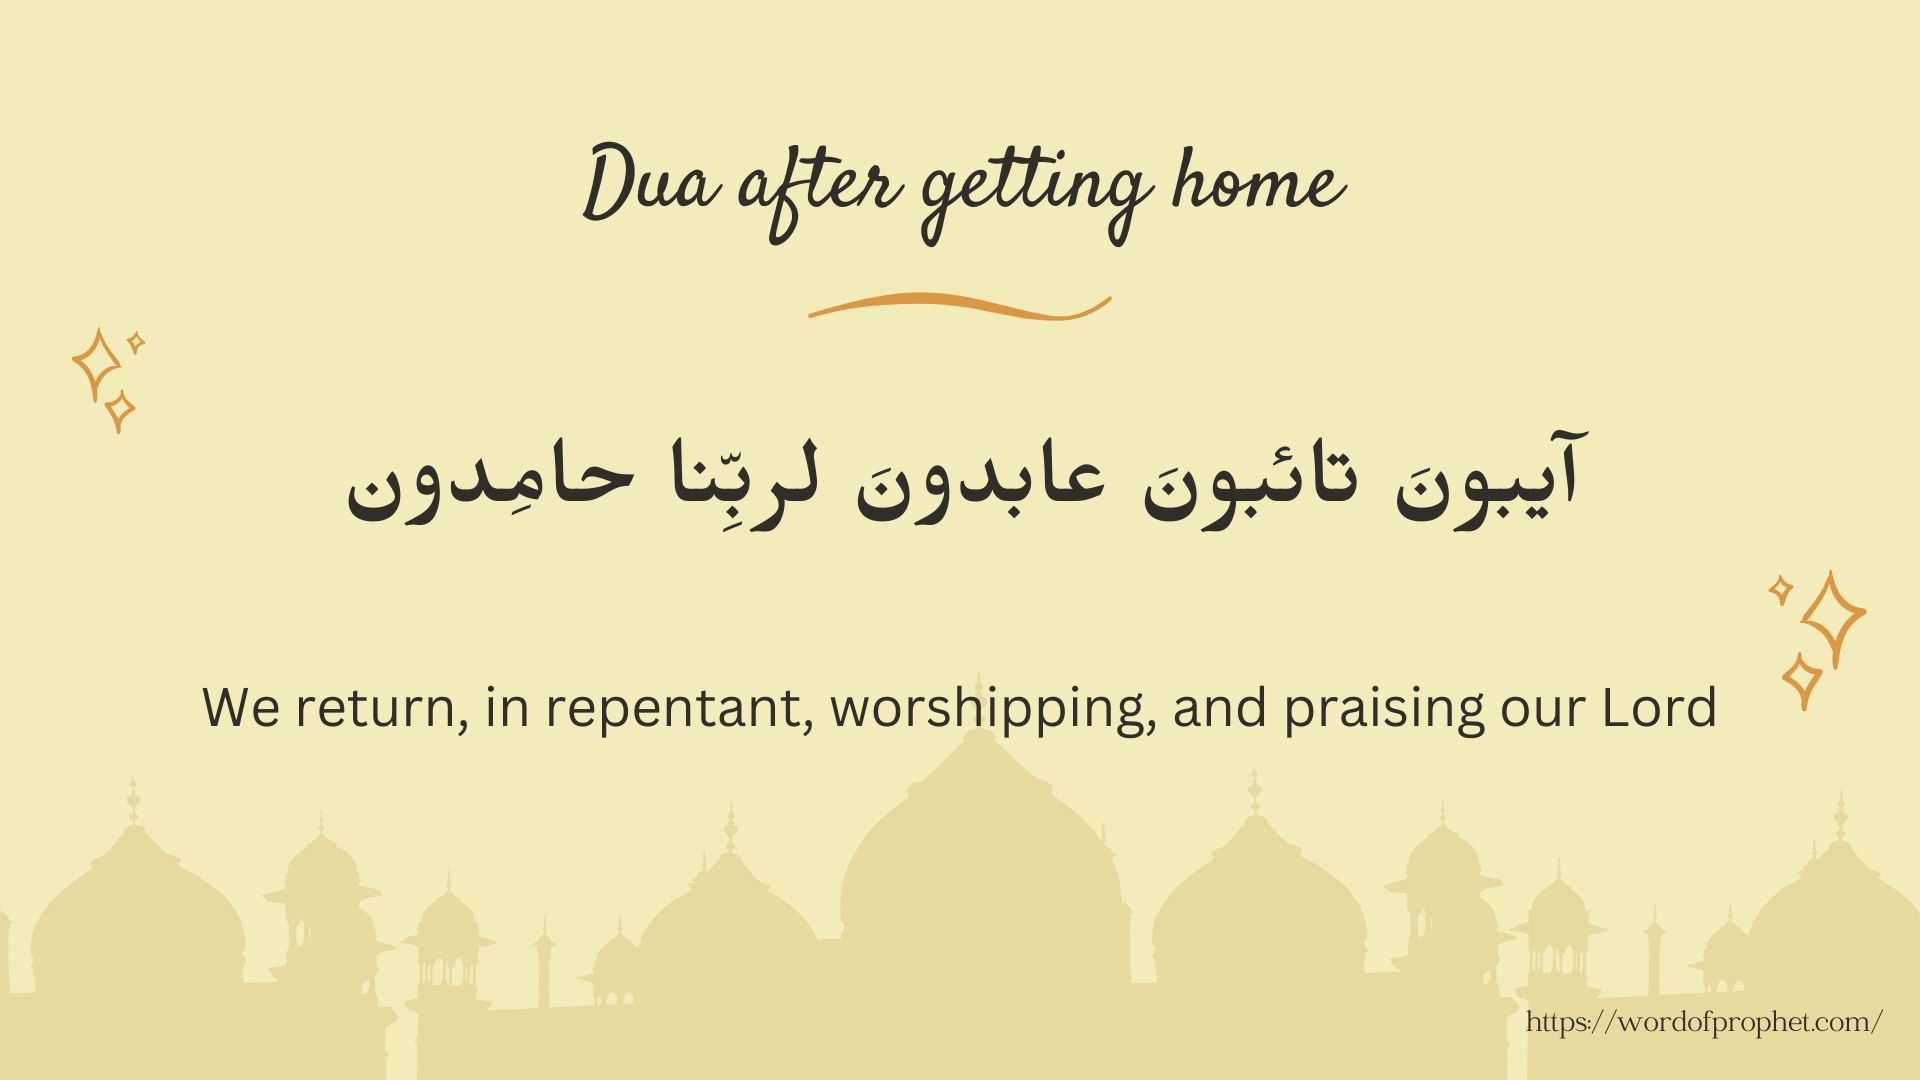 Dua after getting home